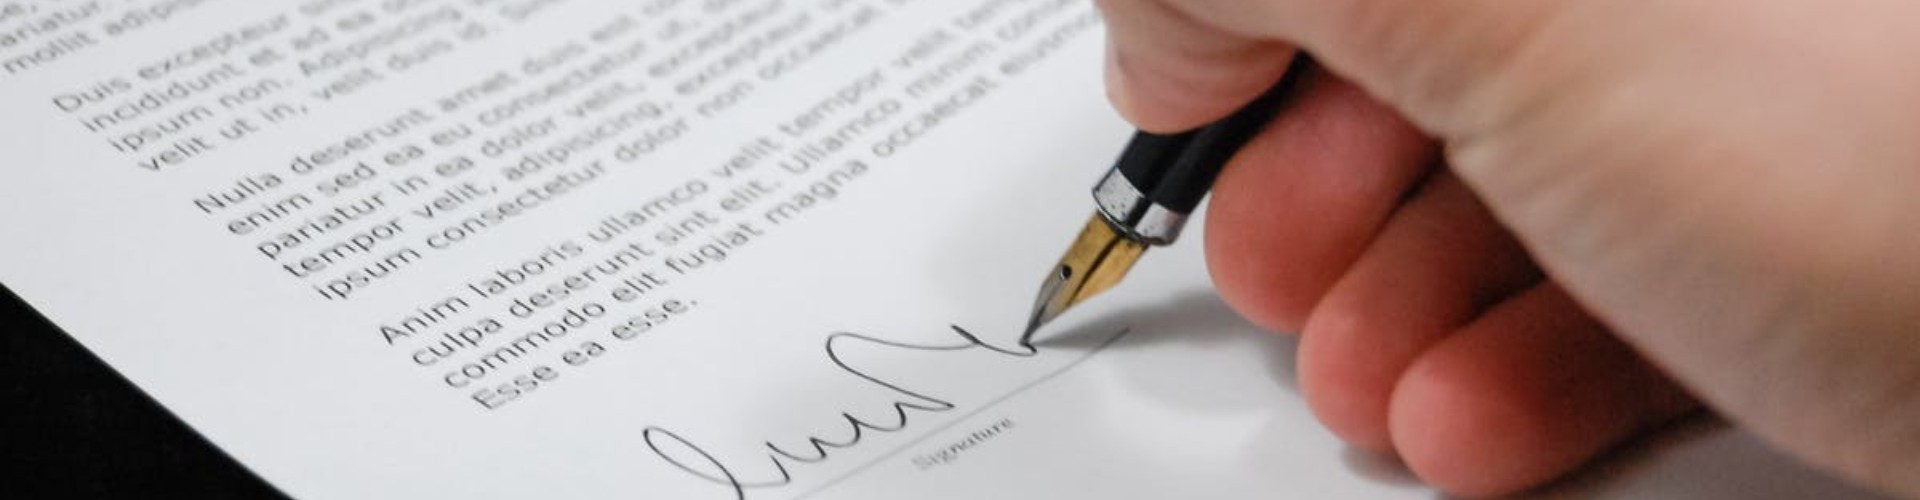 Legal cover letter writing services